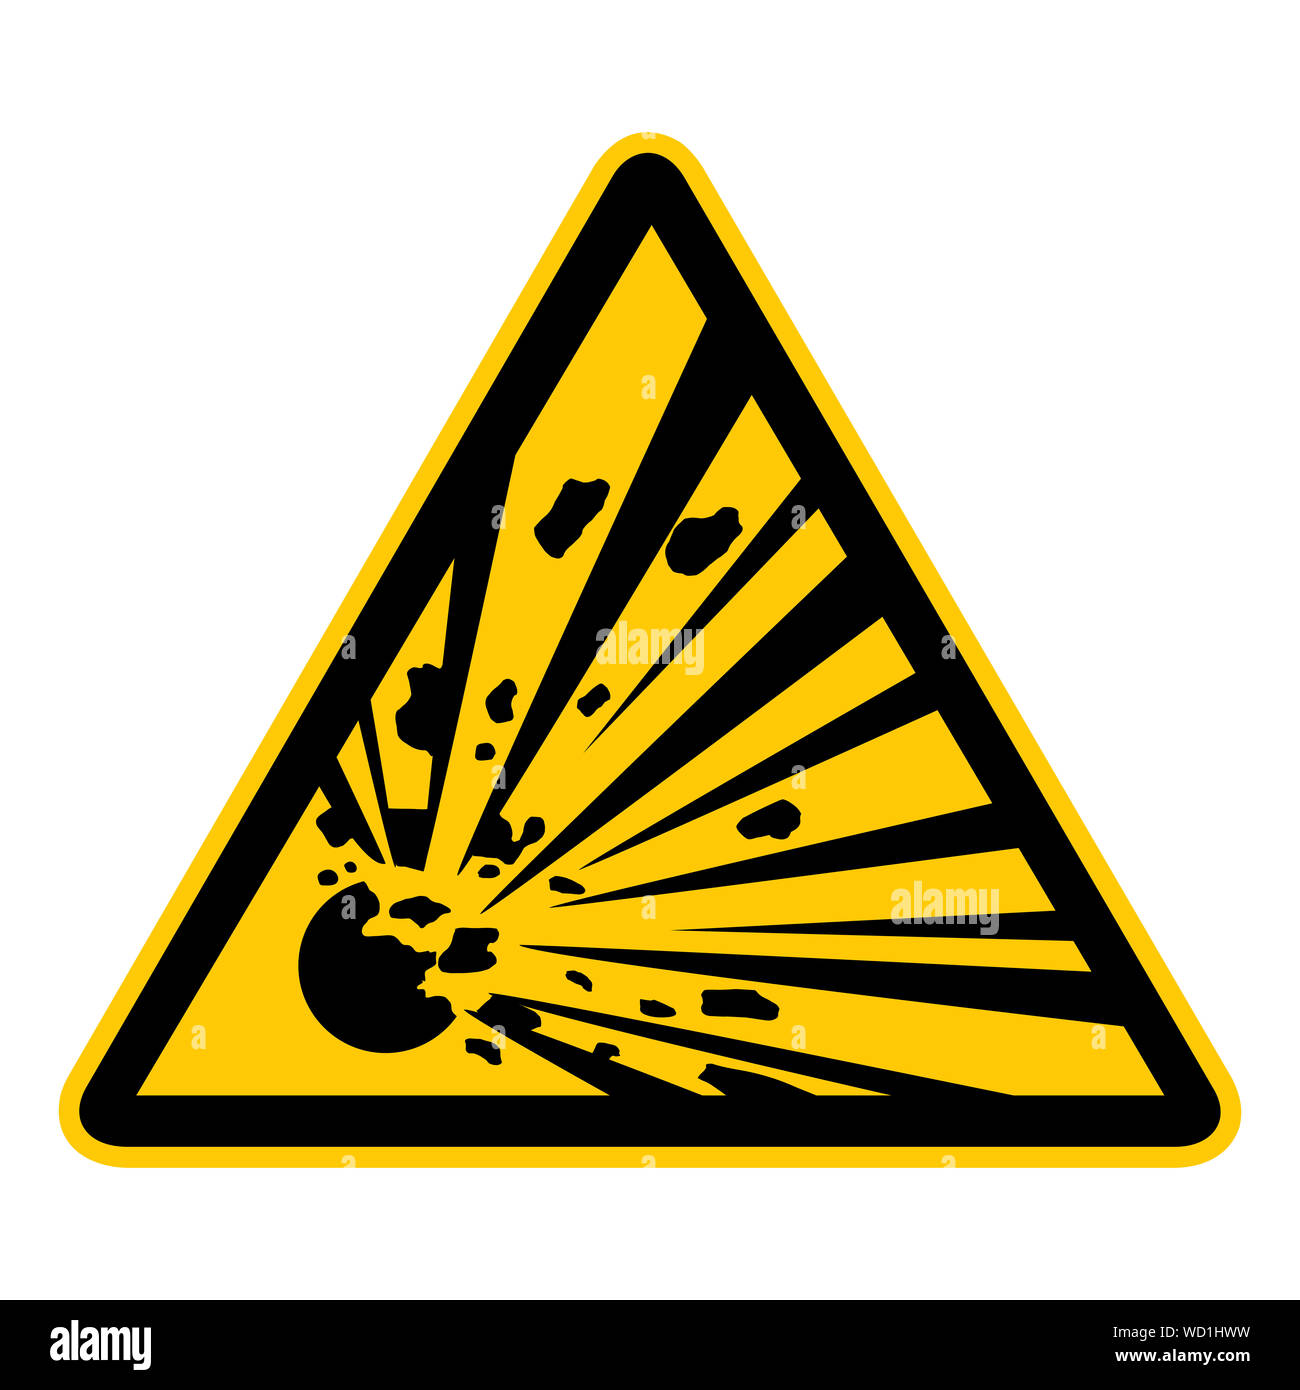 Risk of Explosion Sign Stock Photo